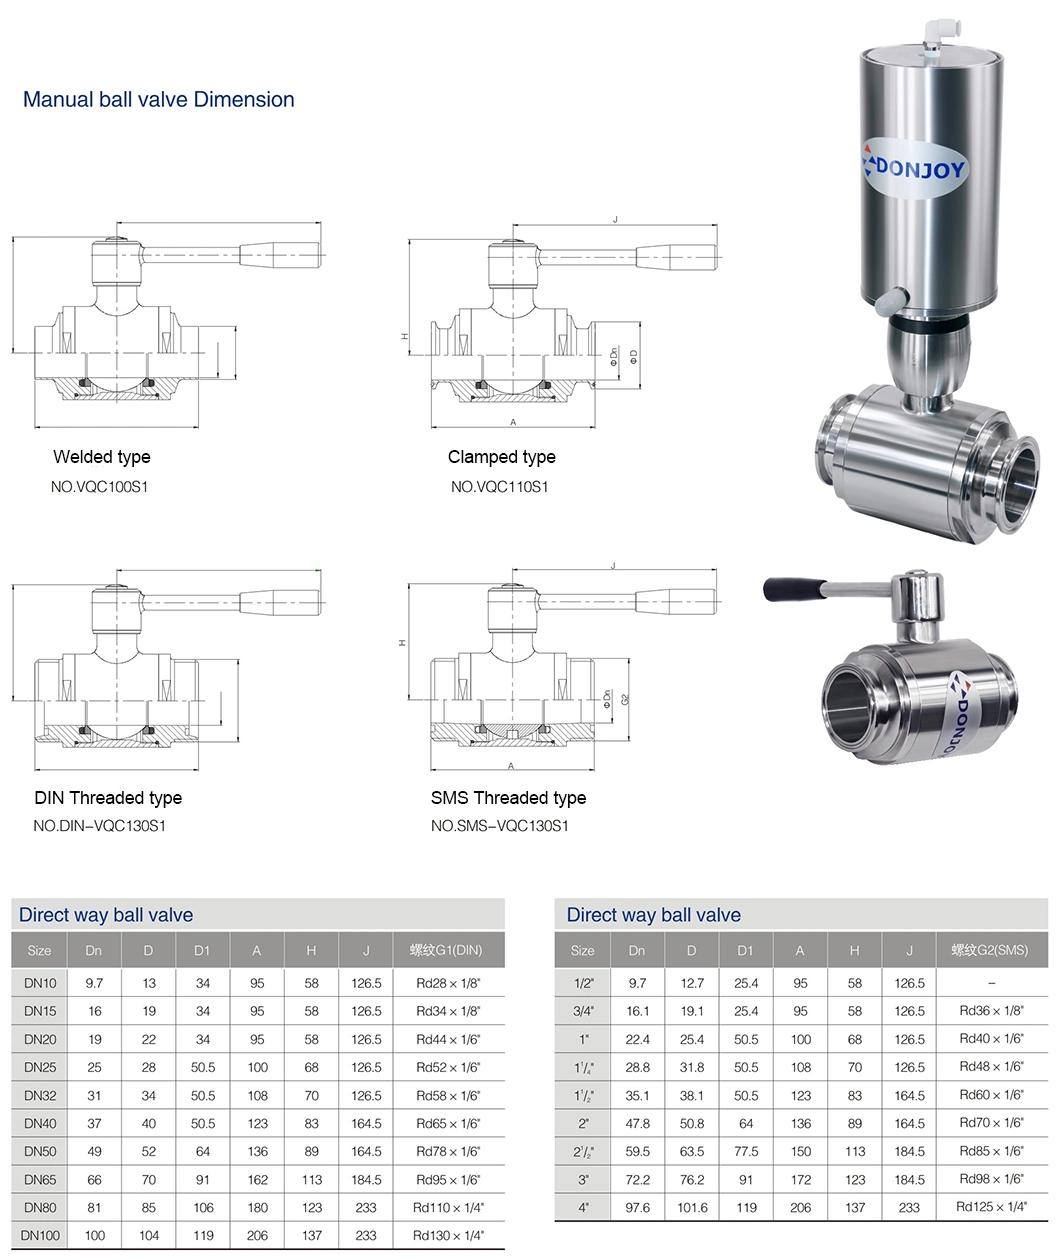 3A Certified Intelligent Control Ball Valve for Brewery Dairy Beverage